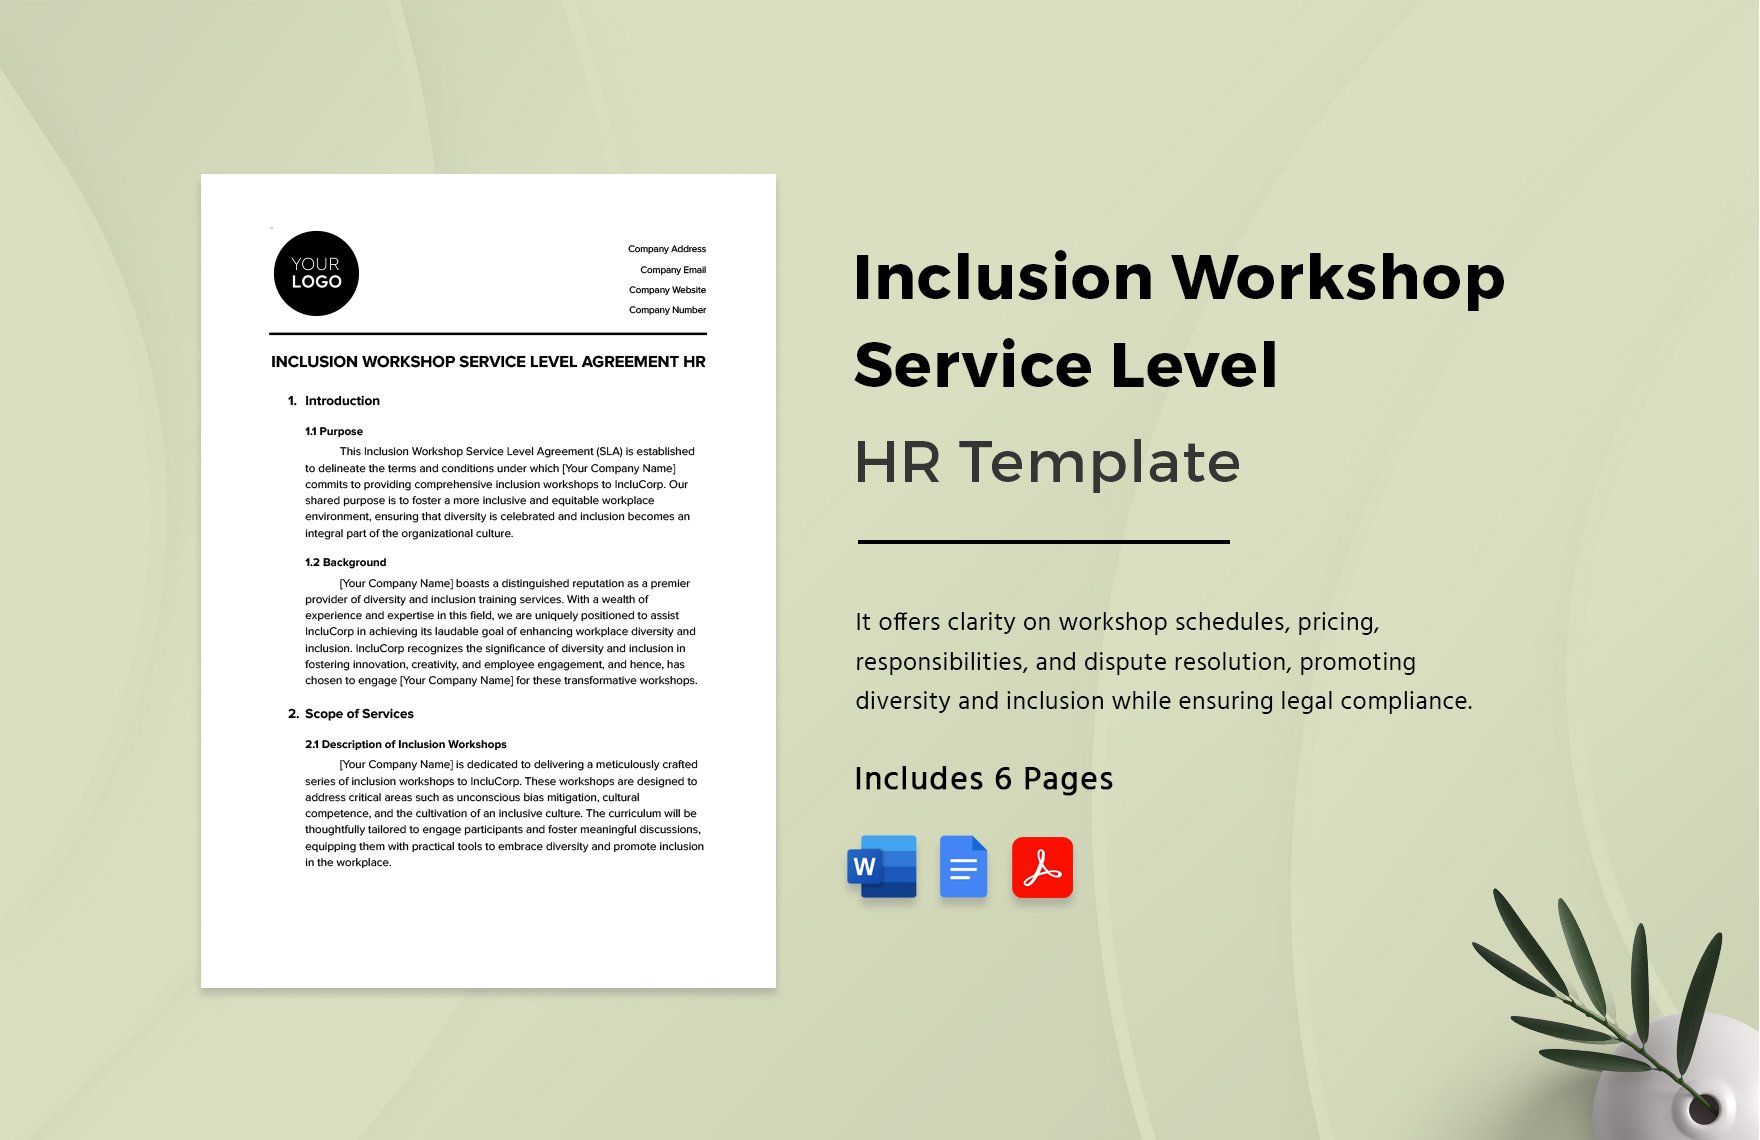 Inclusion Workshop Service Level Agreement HR Template in Word, Google Docs, PDF